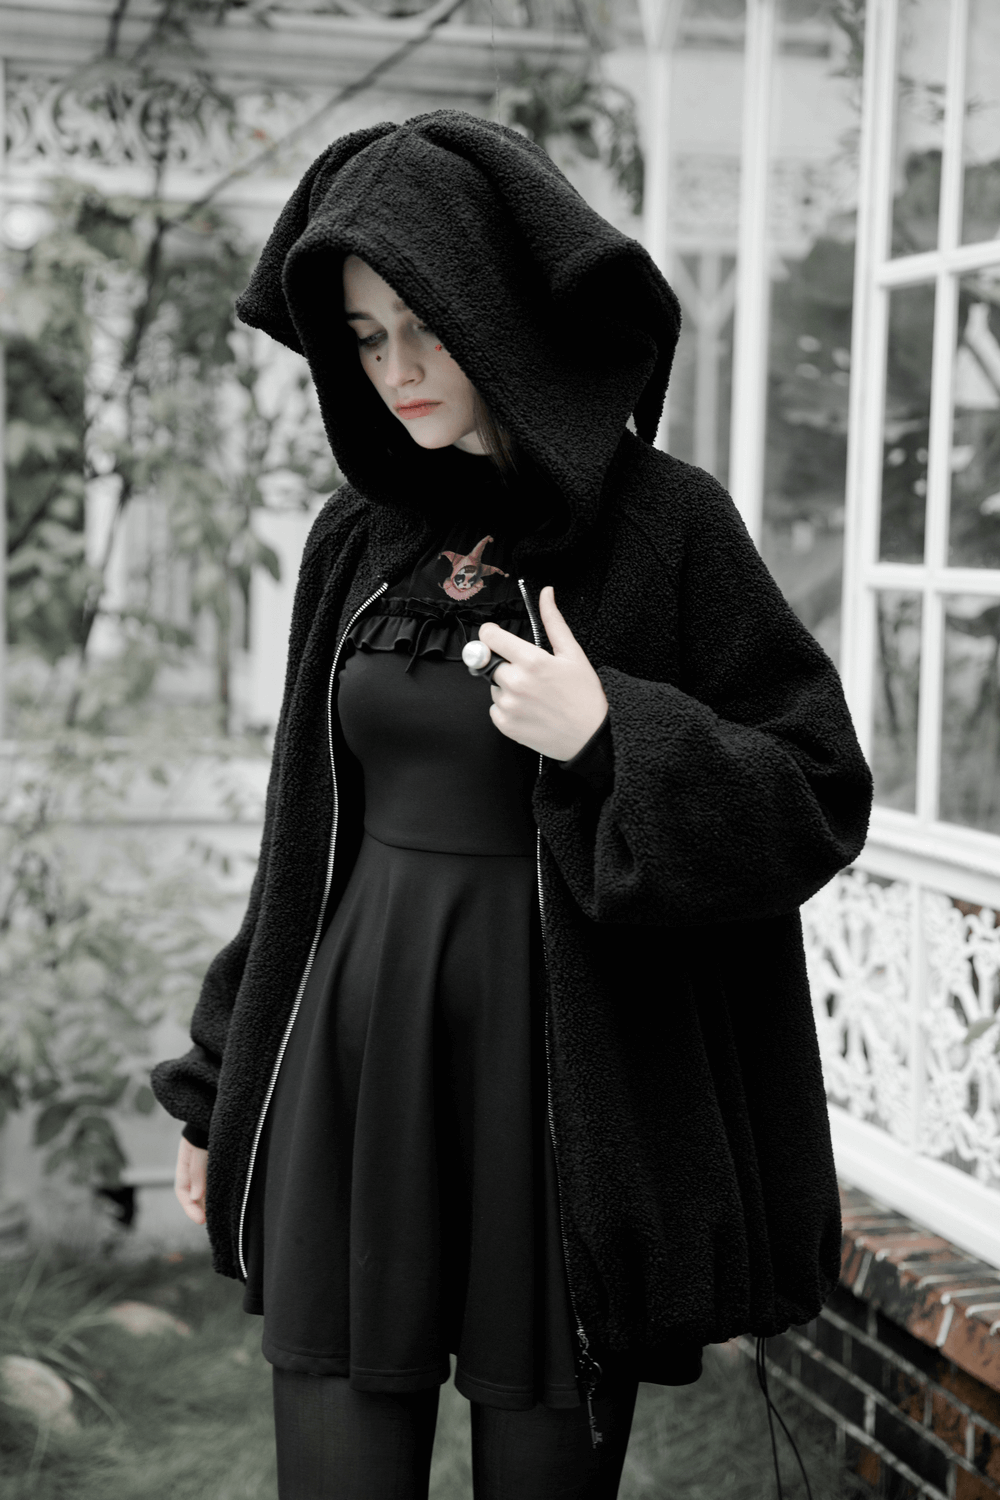 Trendy Black Hooded Jacket with Bunny Plush Purse